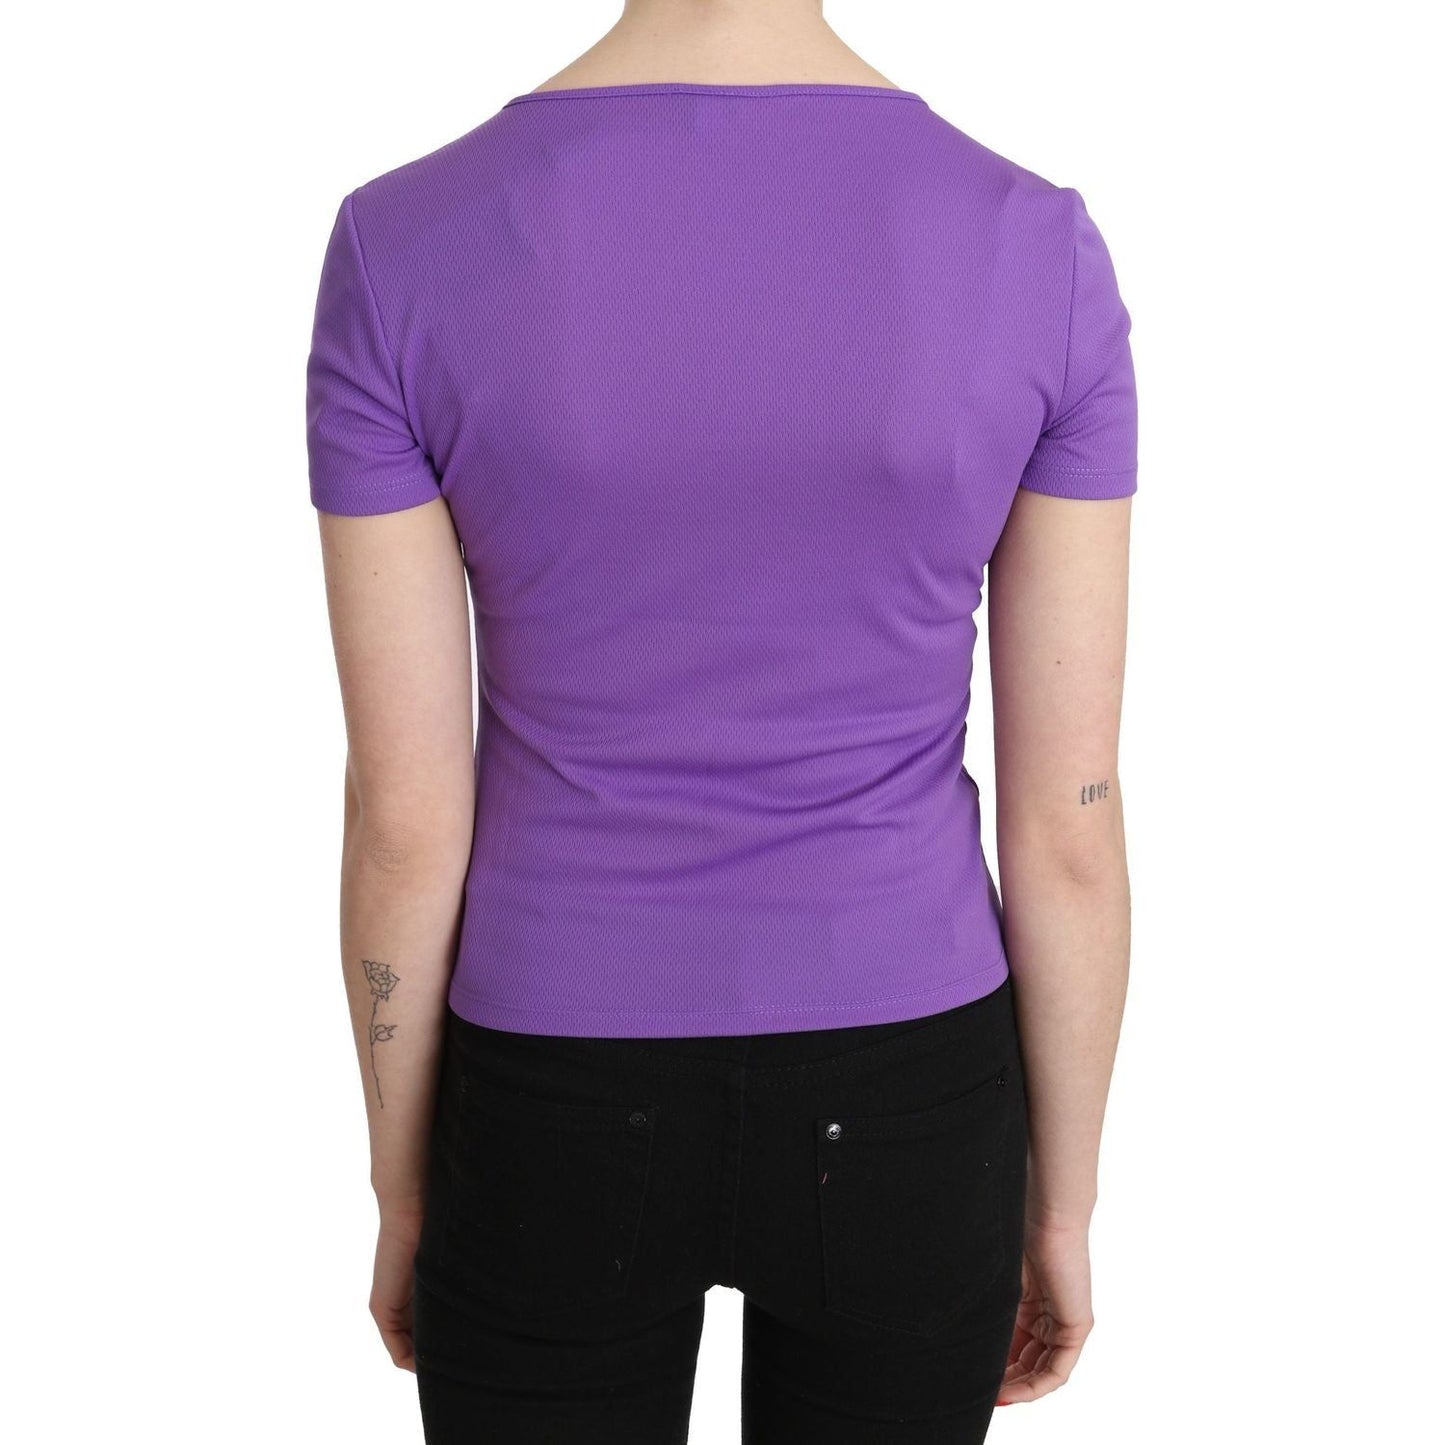 GF Ferre Chic Purple Casual Top for Everyday Elegance purple-100-polyester-short-sleeve-top-blouse IMG_1215-scaled-dc631a7d-617.jpg